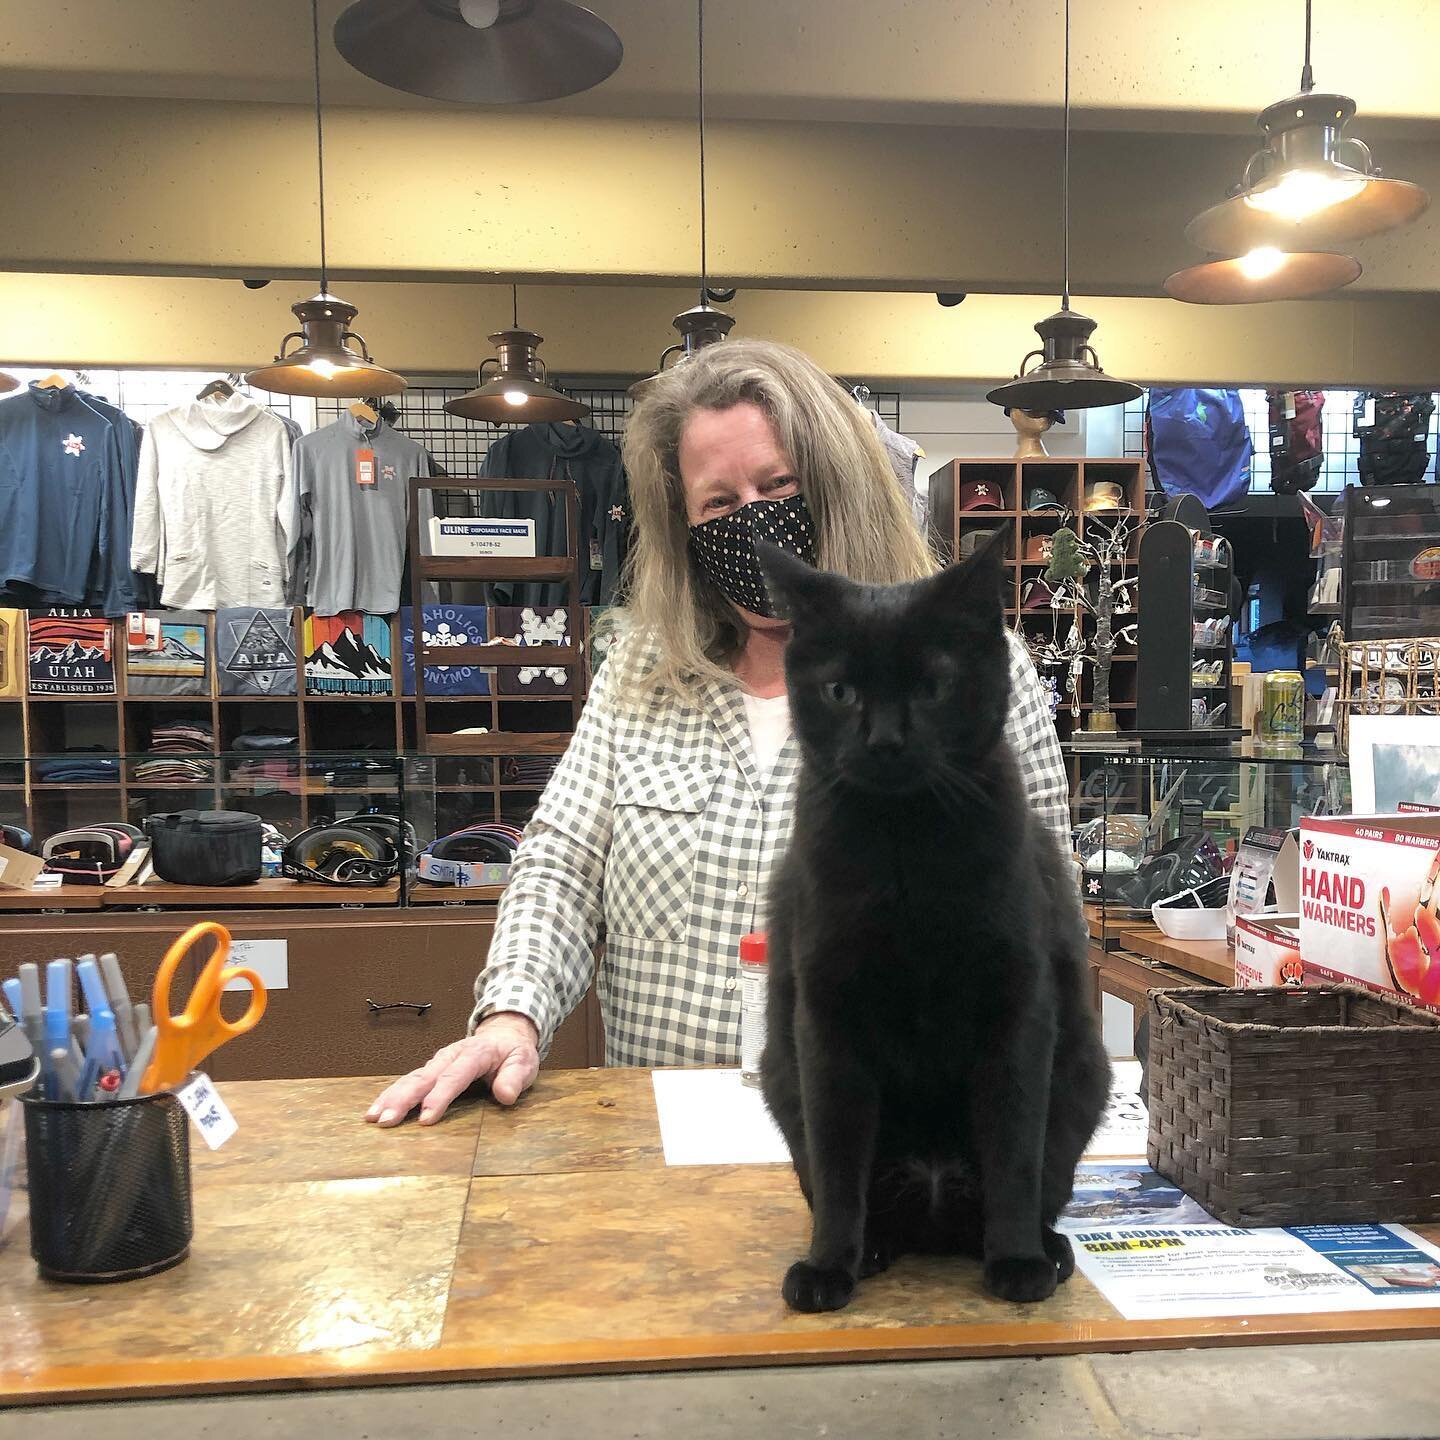 King &amp; Queen of Motherlode Retail 👑

@susan.shippey &amp; Tomahawk 🐱

Our spring sale along with our demo ski sale continue until the end of May! #powderhouseut #altaskiarea #saltlakecity #saleseason